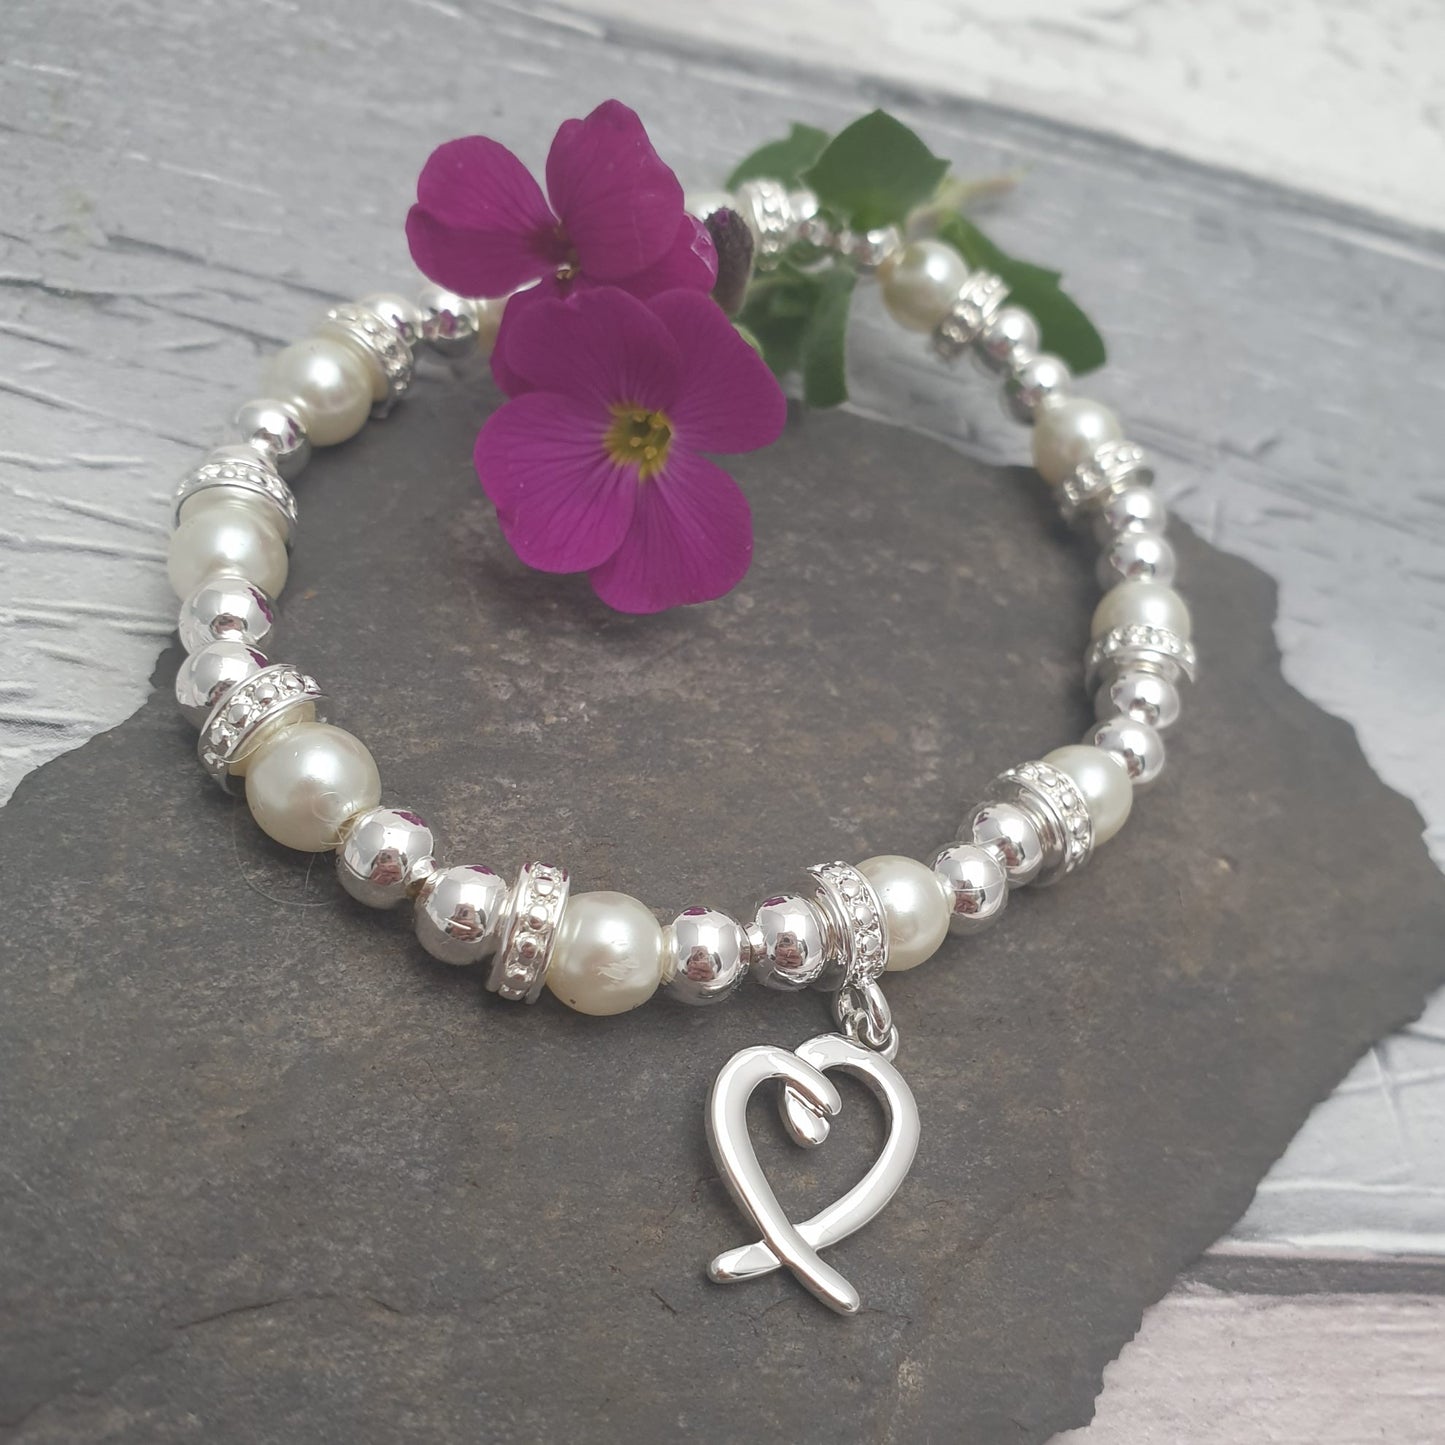 A silver and pearl stretch bracelet with diamante covered spacers. The bracelet has a silver love heart charm attached to one of the spacers.